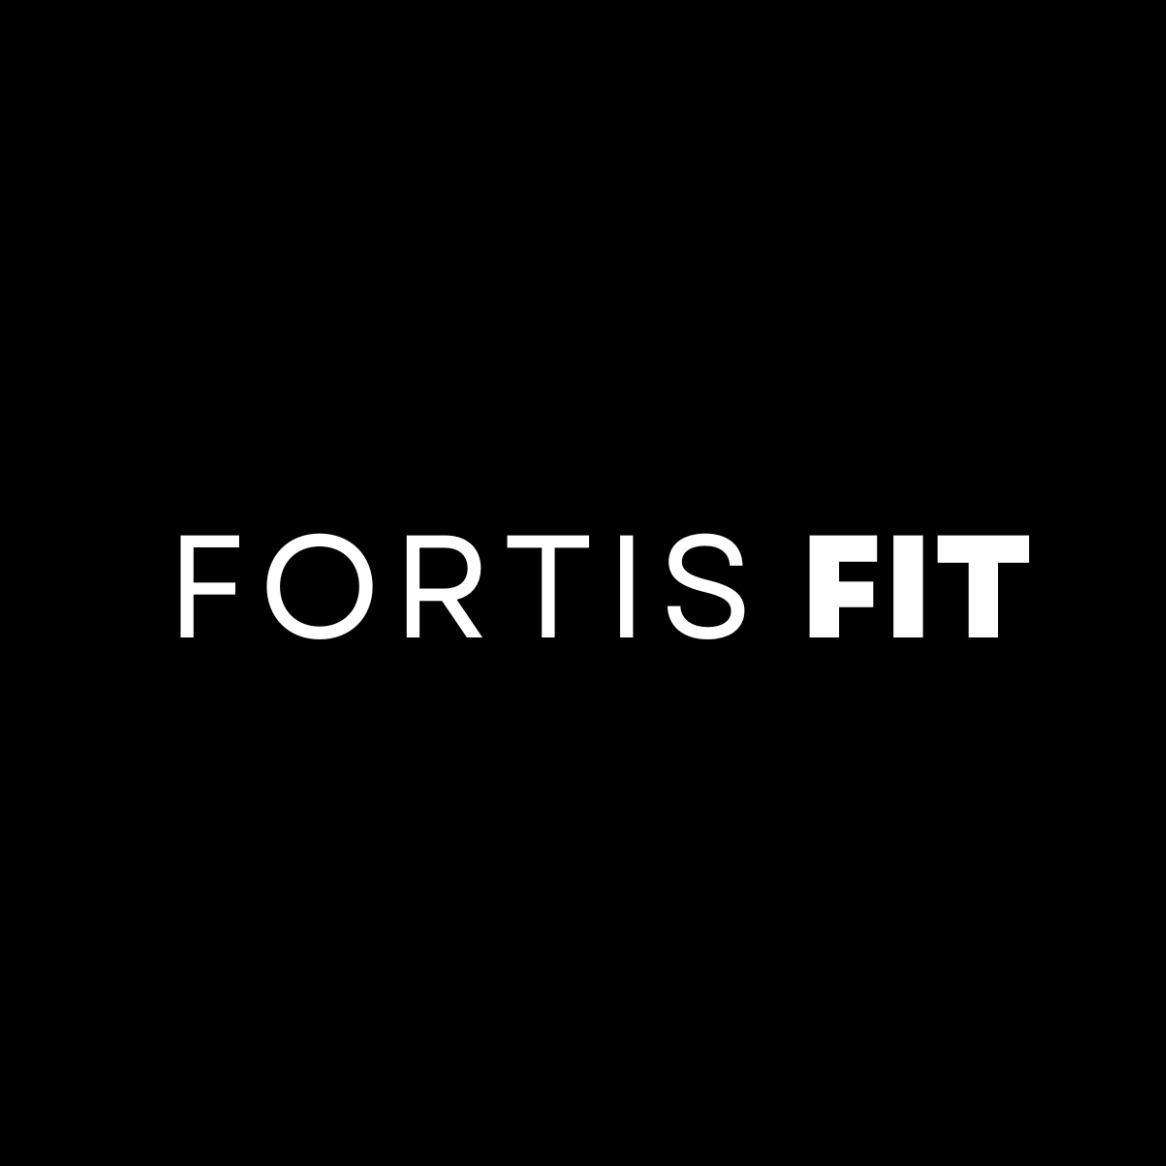 Fortis Fit - Sydney, NSW 2000 - 0411 233 133 | ShowMeLocal.com